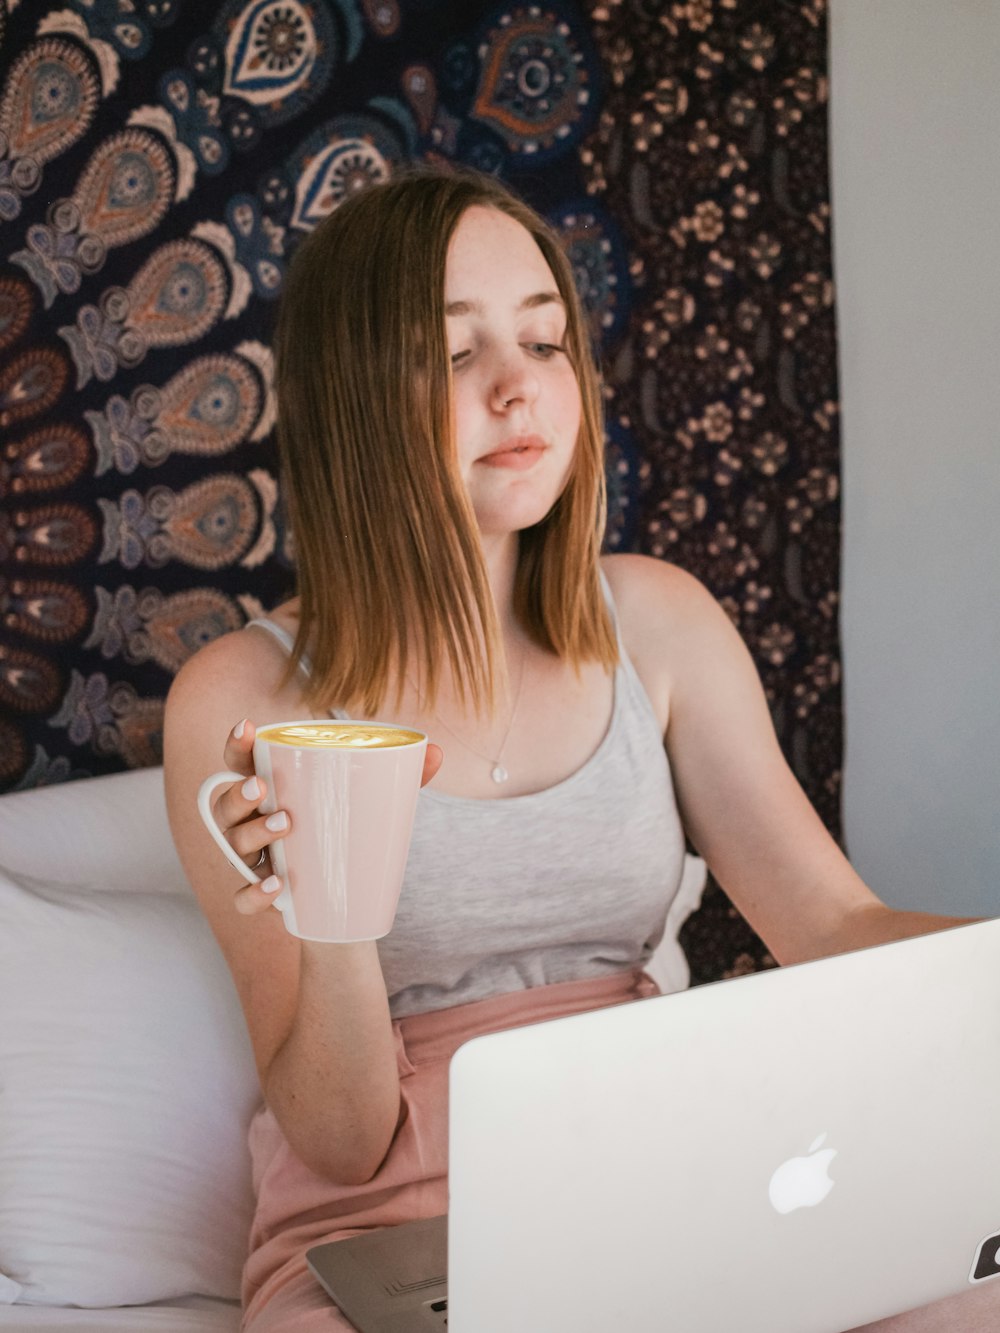 woman using MacBook and holding mug while sitting on bed